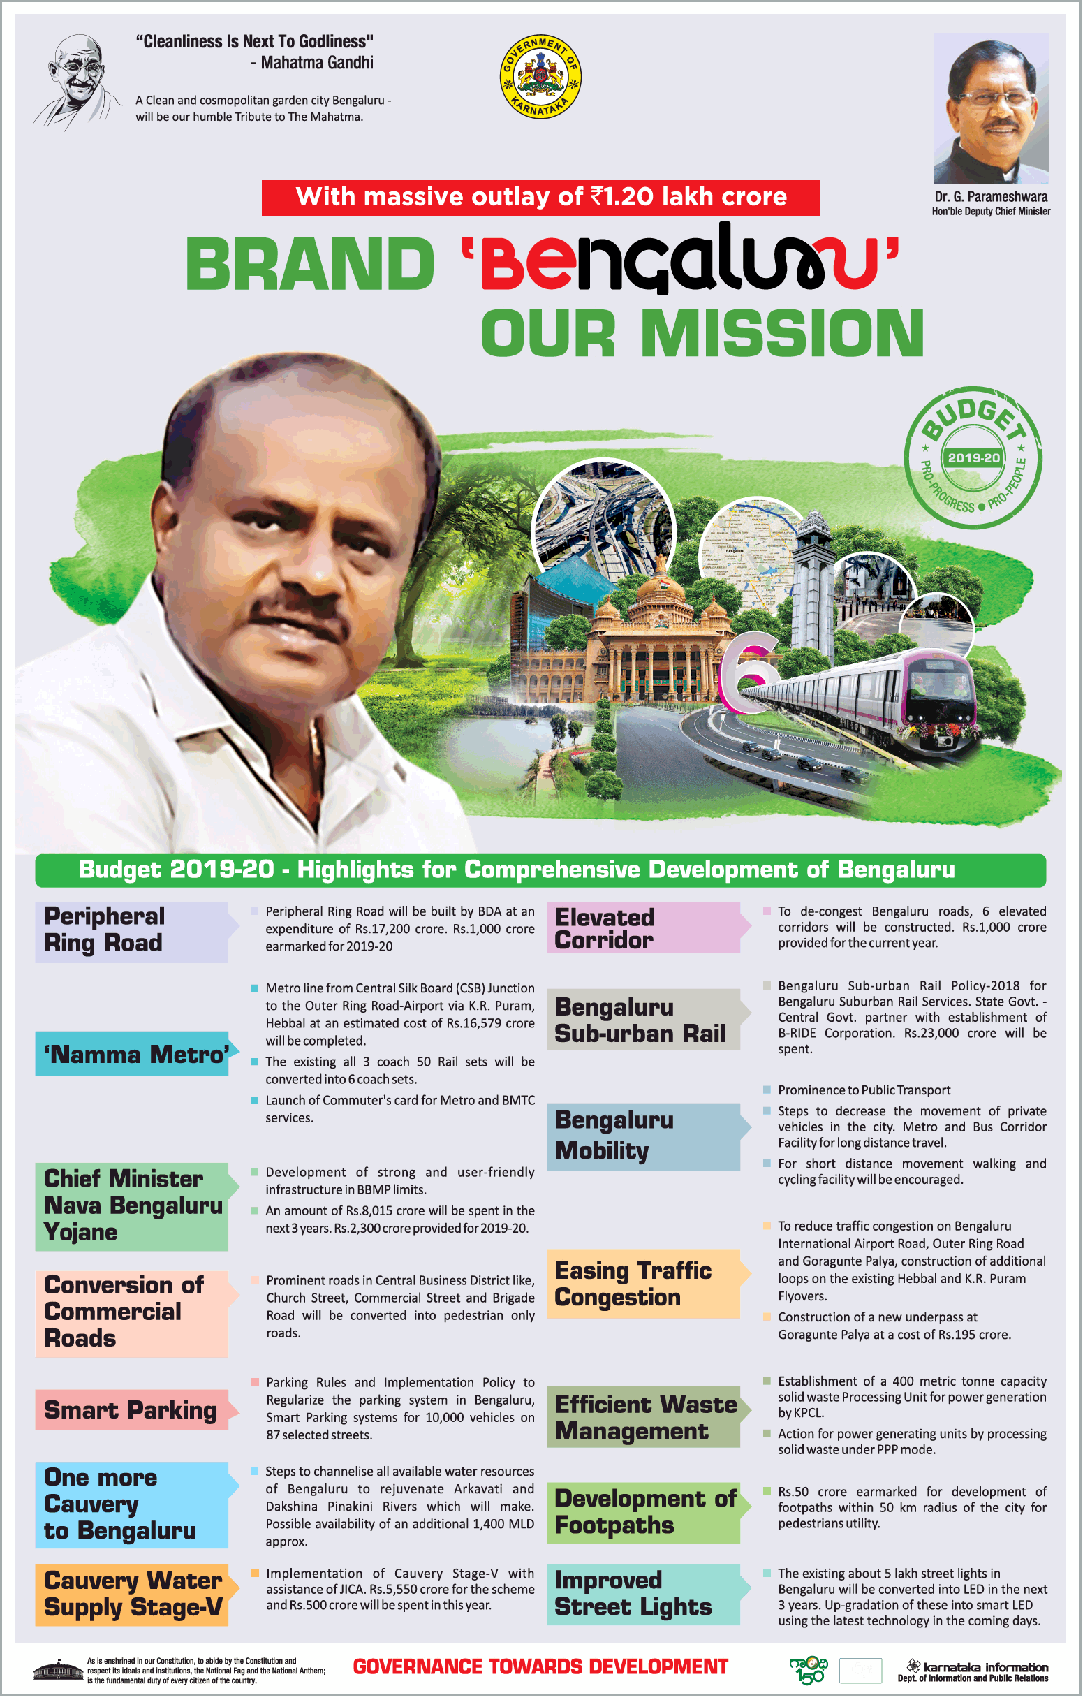 brand-bengaluru-our-mission-highlights-peripheral-ring-road-namma-metro-ad-times-of-india-bangalore-22-02-2019.png